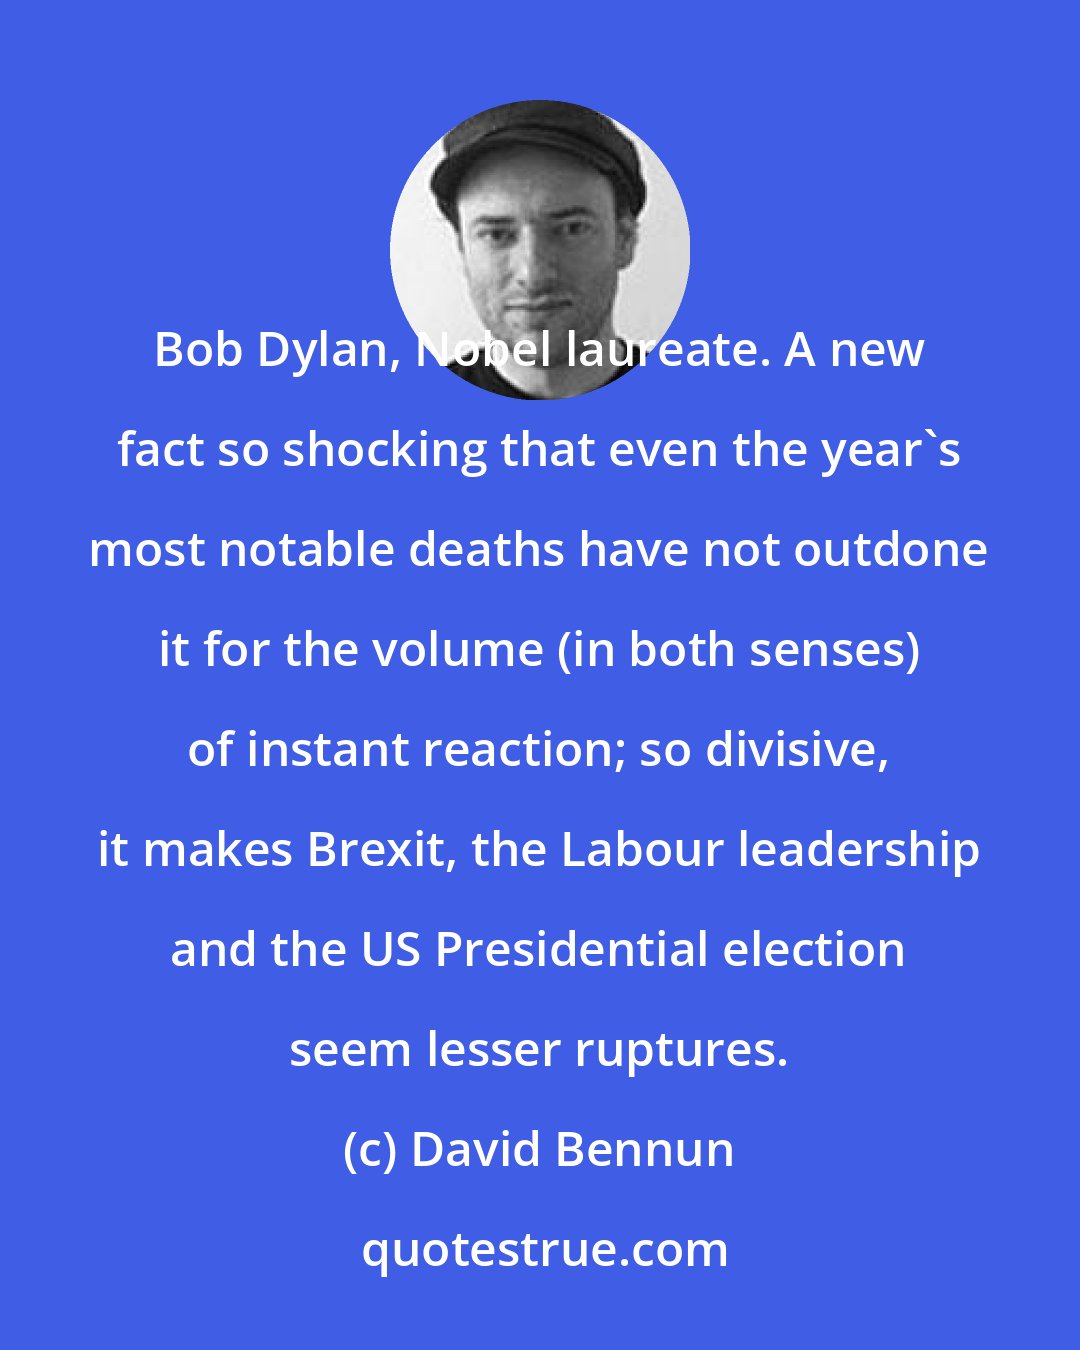 David Bennun: Bob Dylan, Nobel laureate. A new fact so shocking that even the year's most notable deaths have not outdone it for the volume (in both senses) of instant reaction; so divisive, it makes Brexit, the Labour leadership and the US Presidential election seem lesser ruptures.